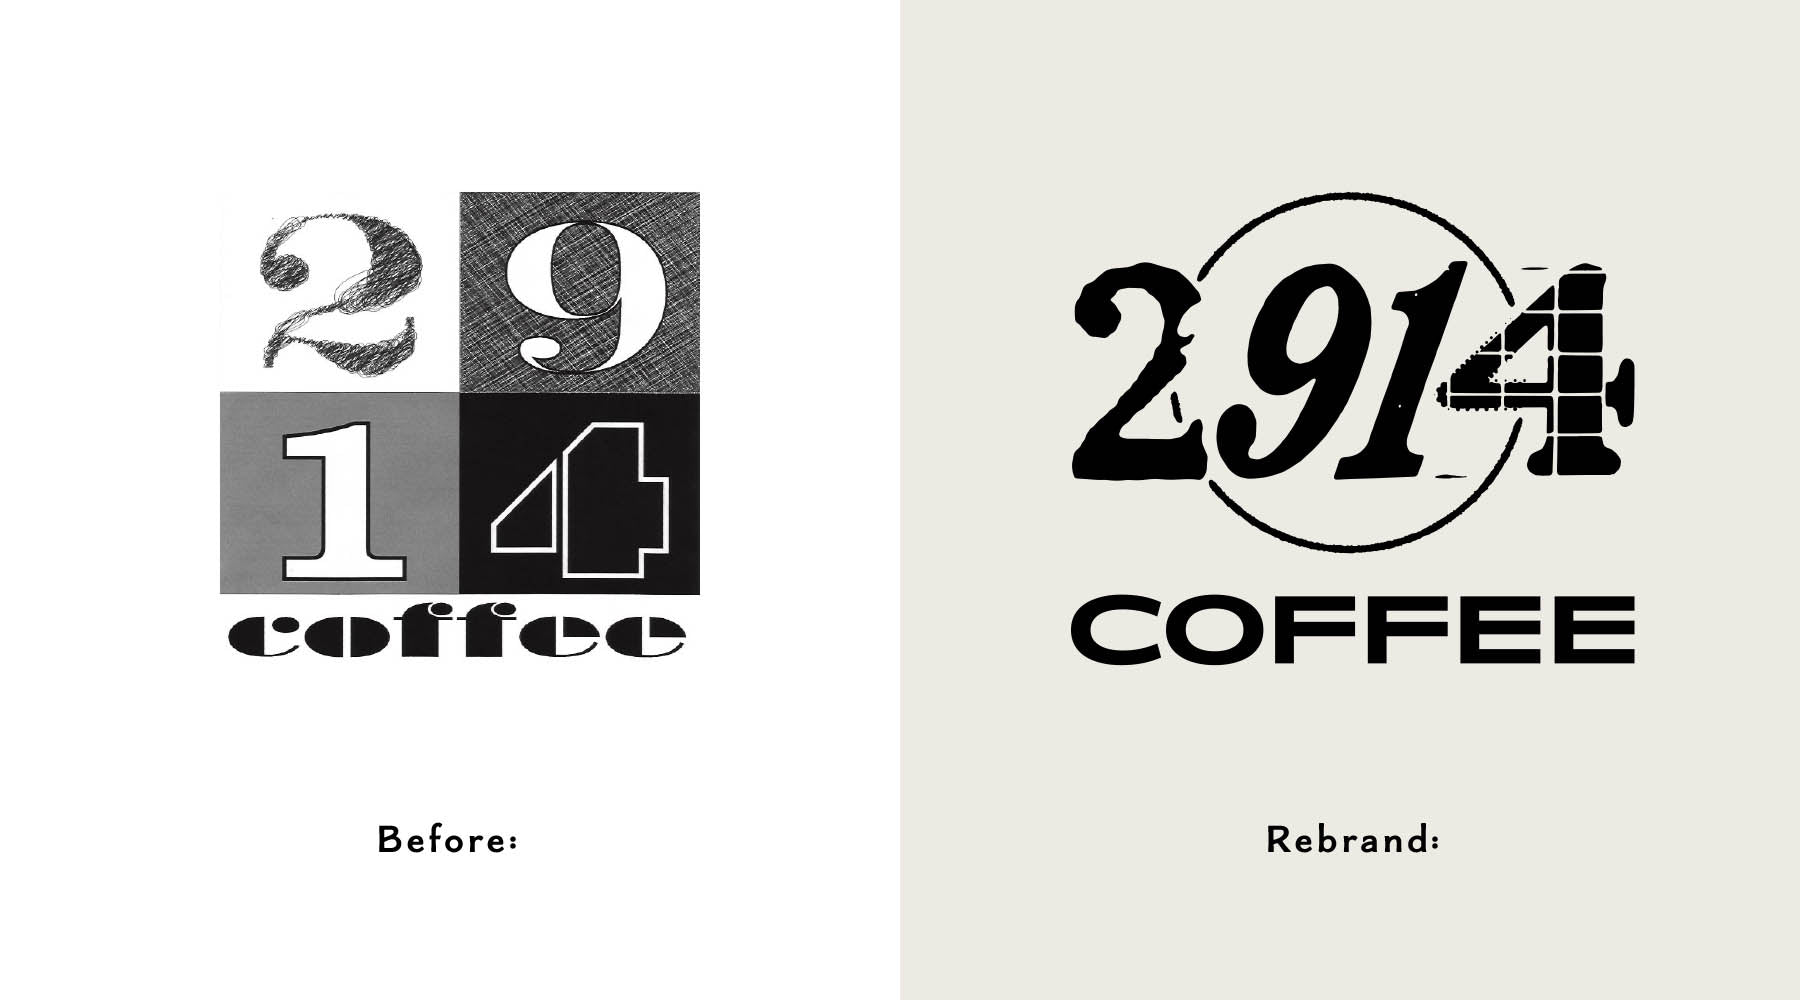 before and after branding 2914 coffee